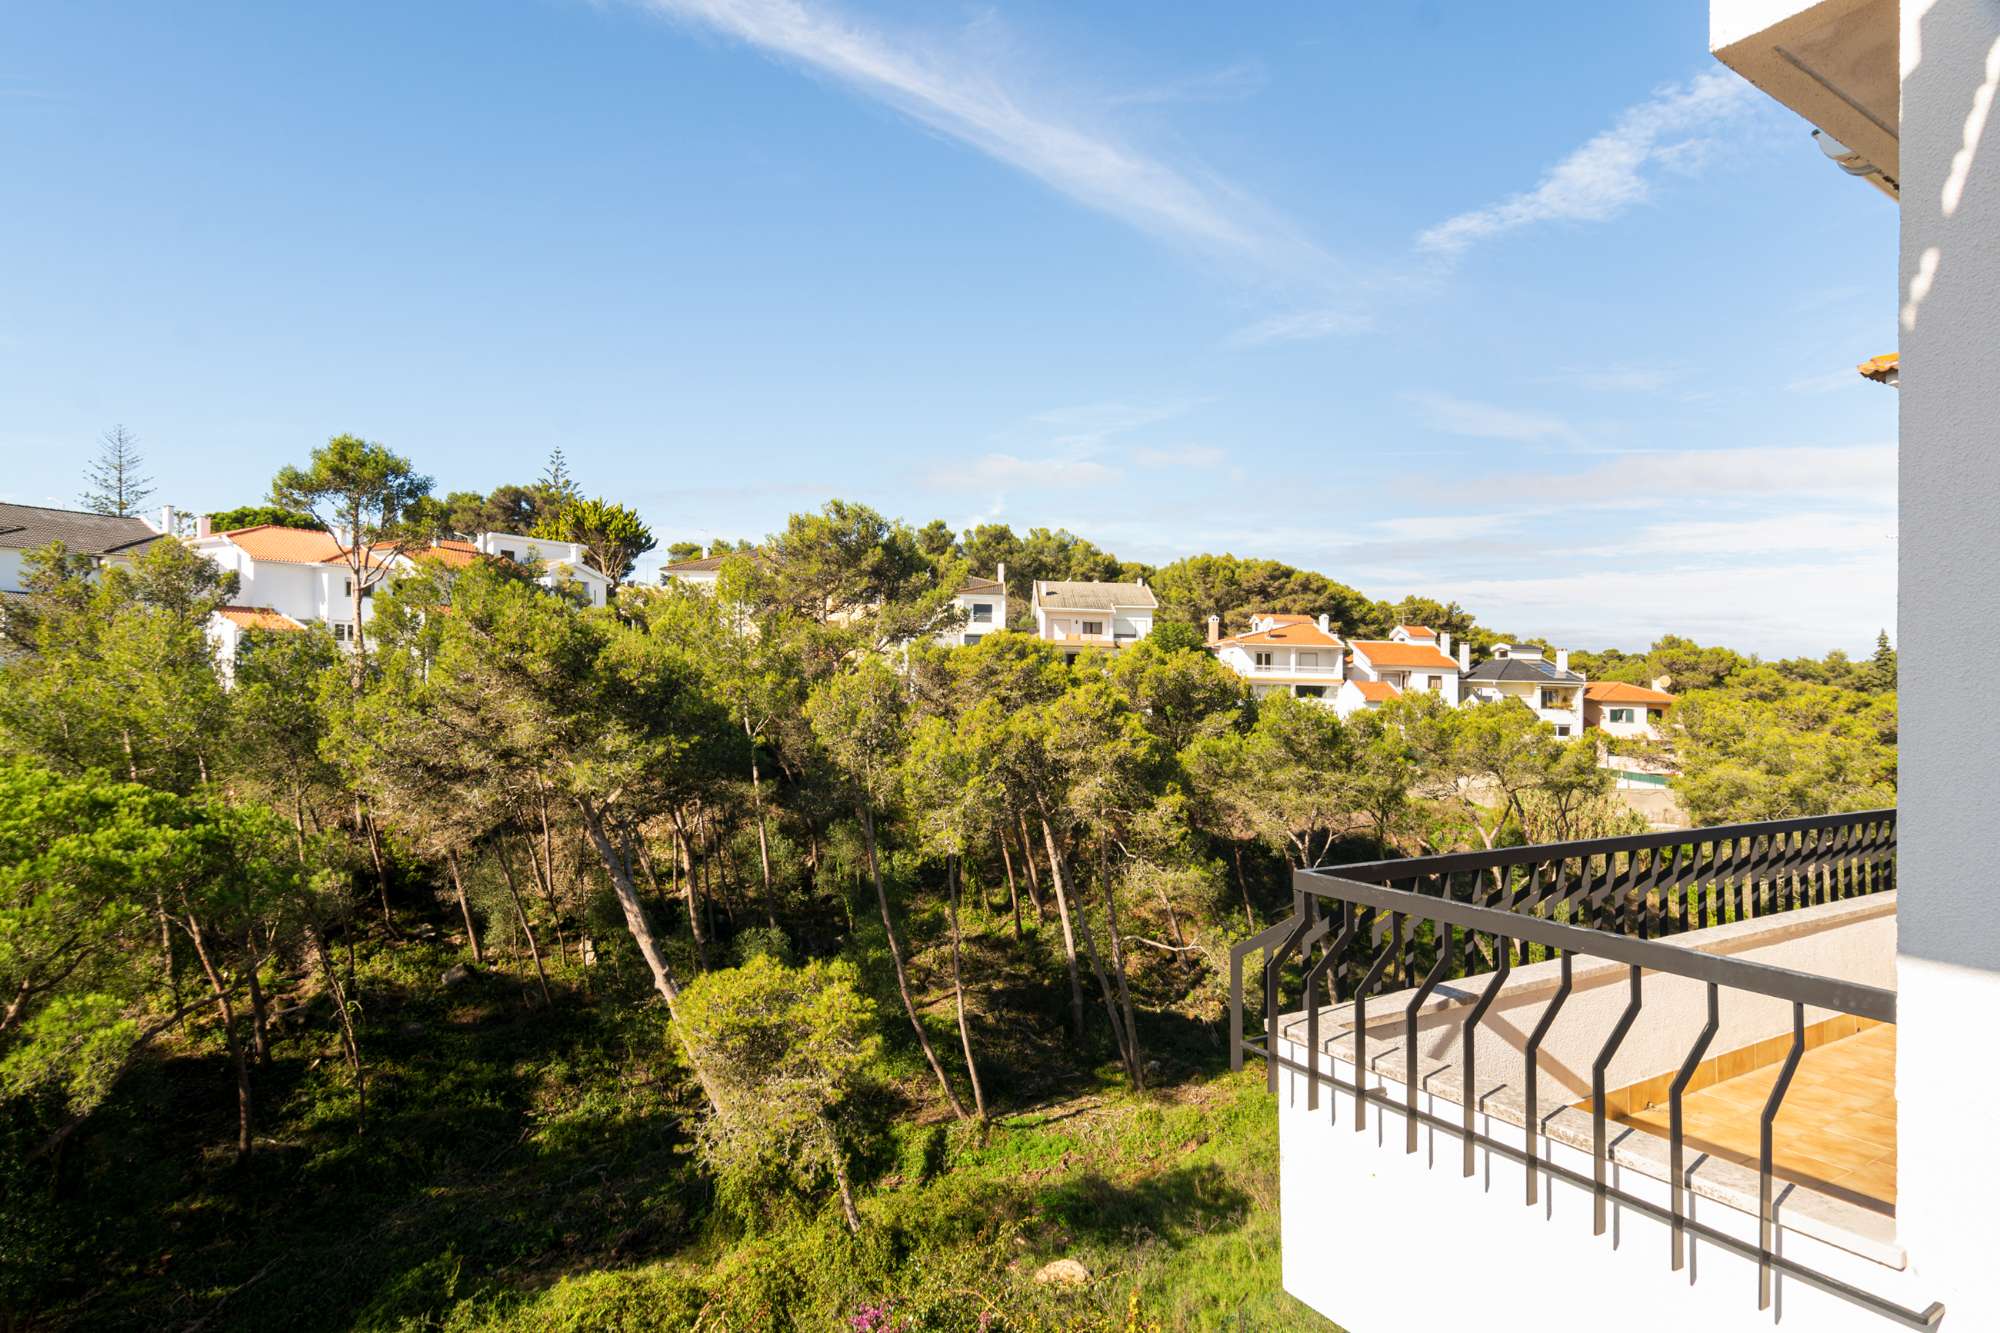 Furnished and equipped 2-bedroom flat for rent in Cascais